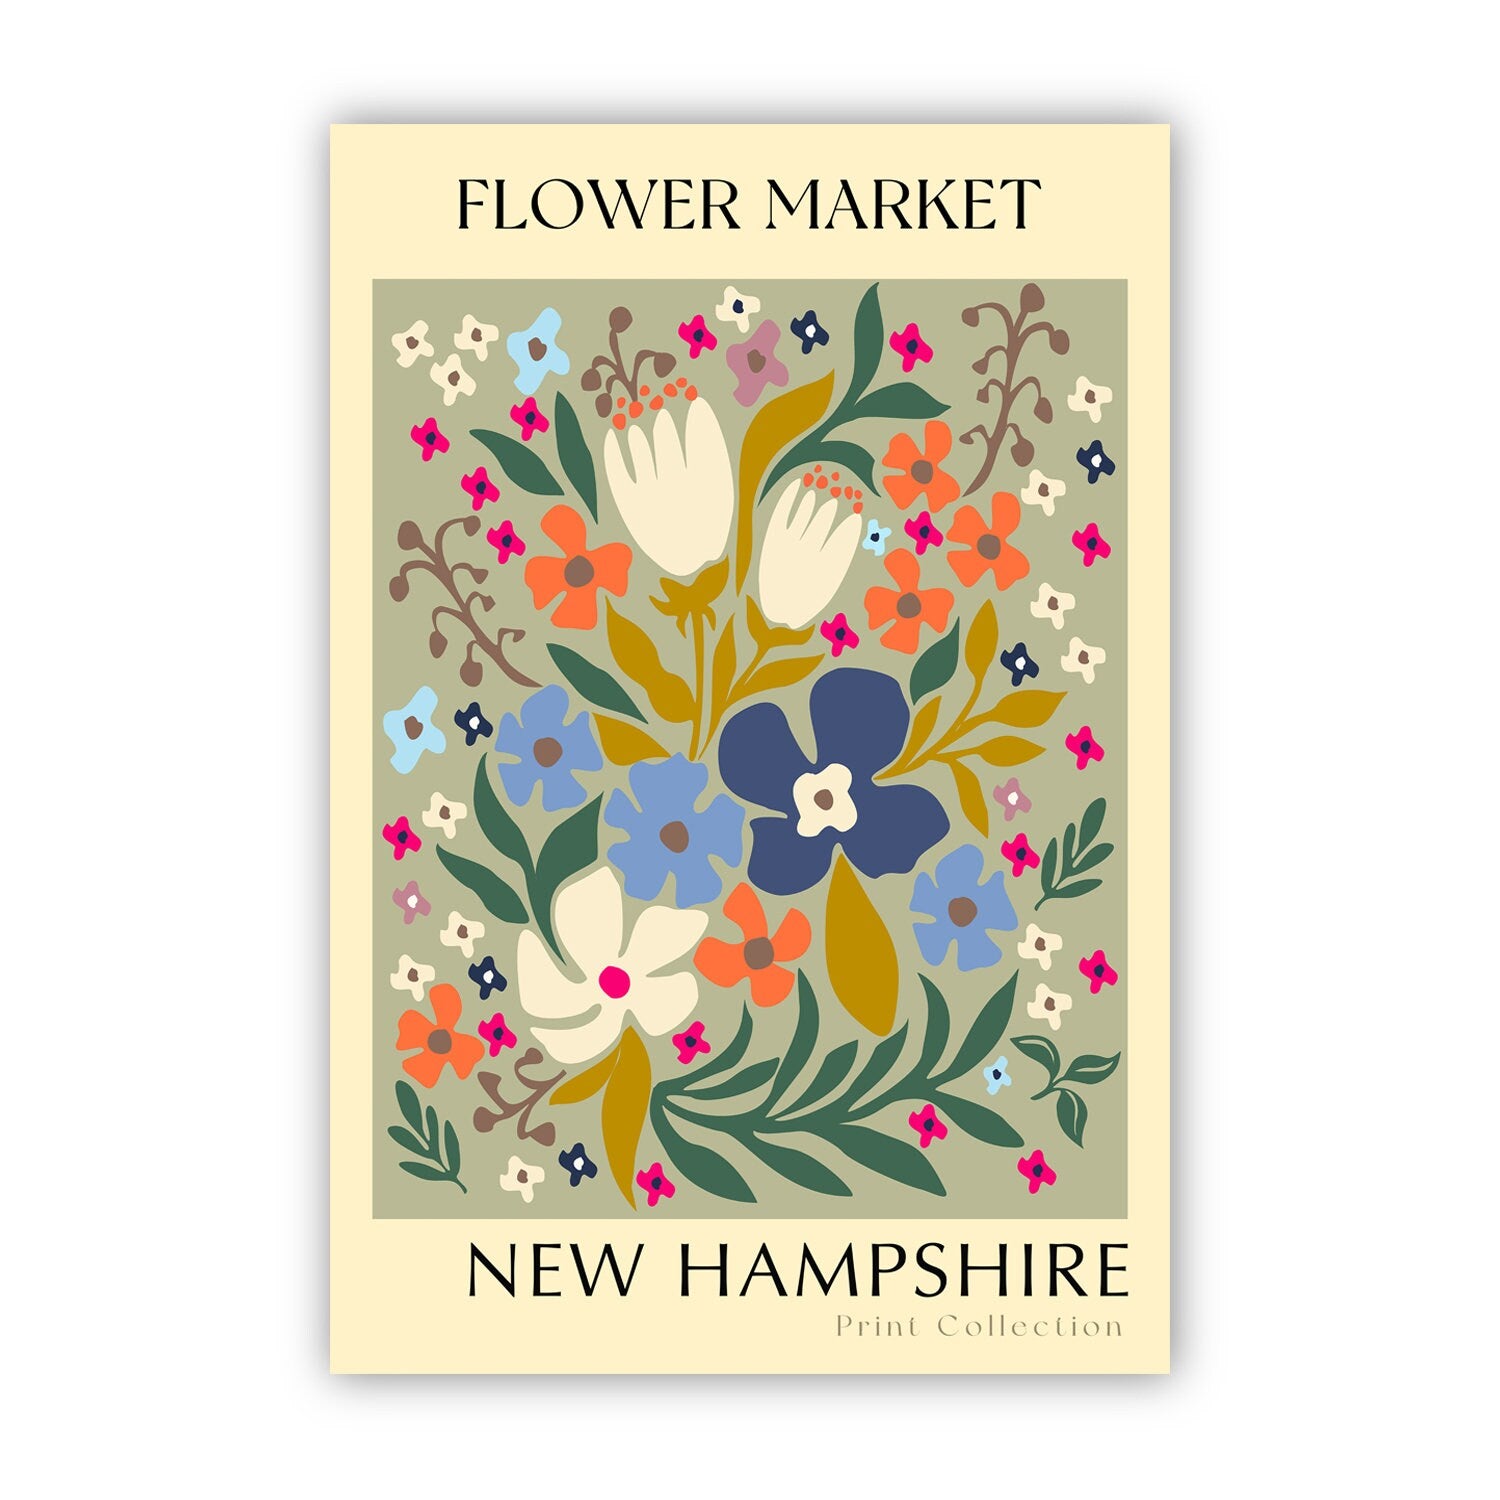 New Hampshire State flower print, USA states poster, New Hampshire flower market poster, Botanical posters, Nature poster, Floral wall art